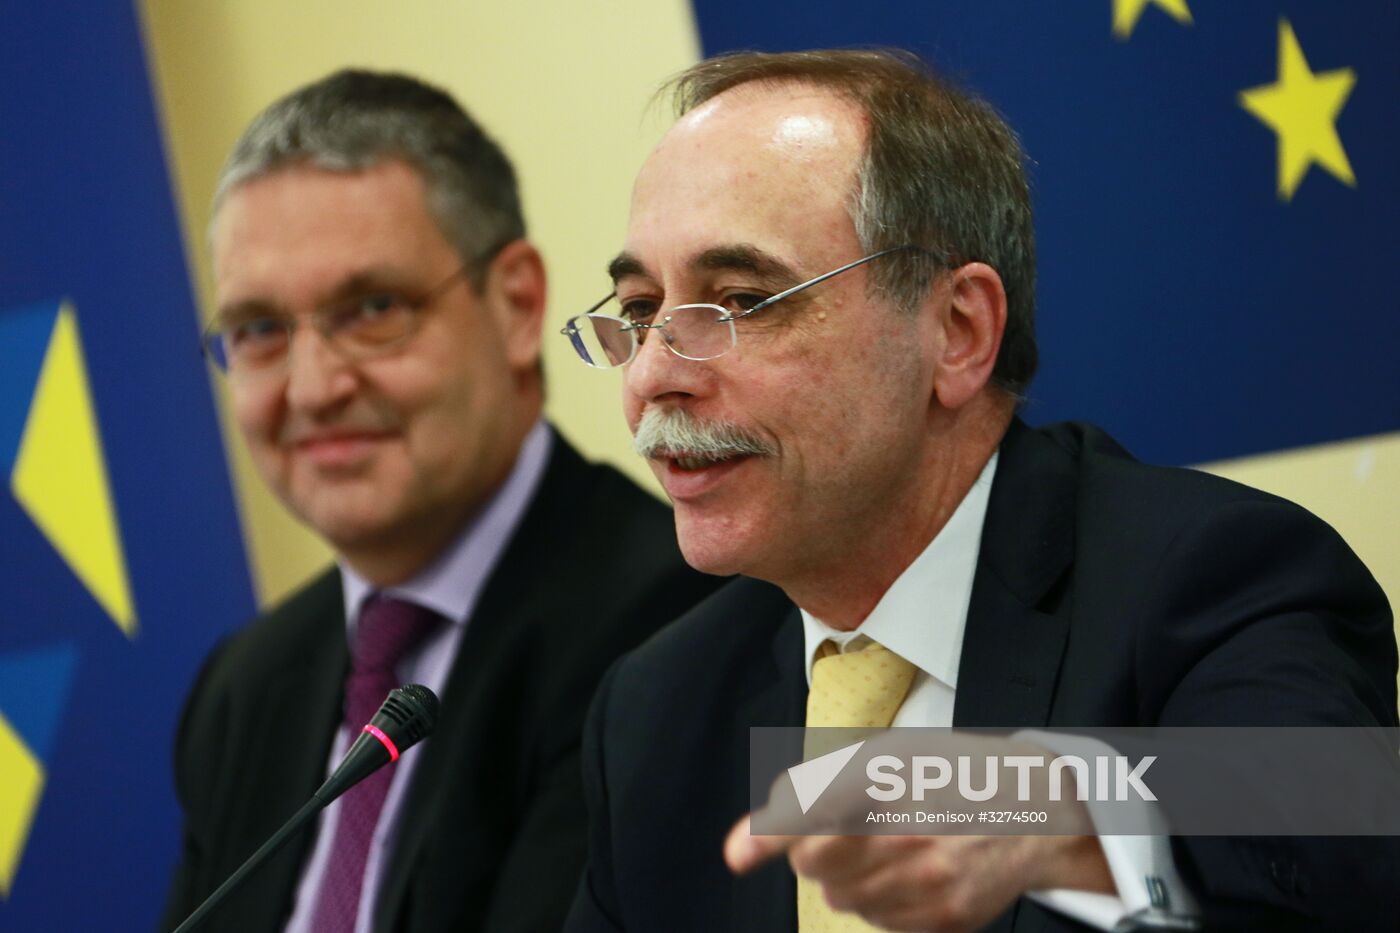 News conference on Bulgaria's initial European Council presidency